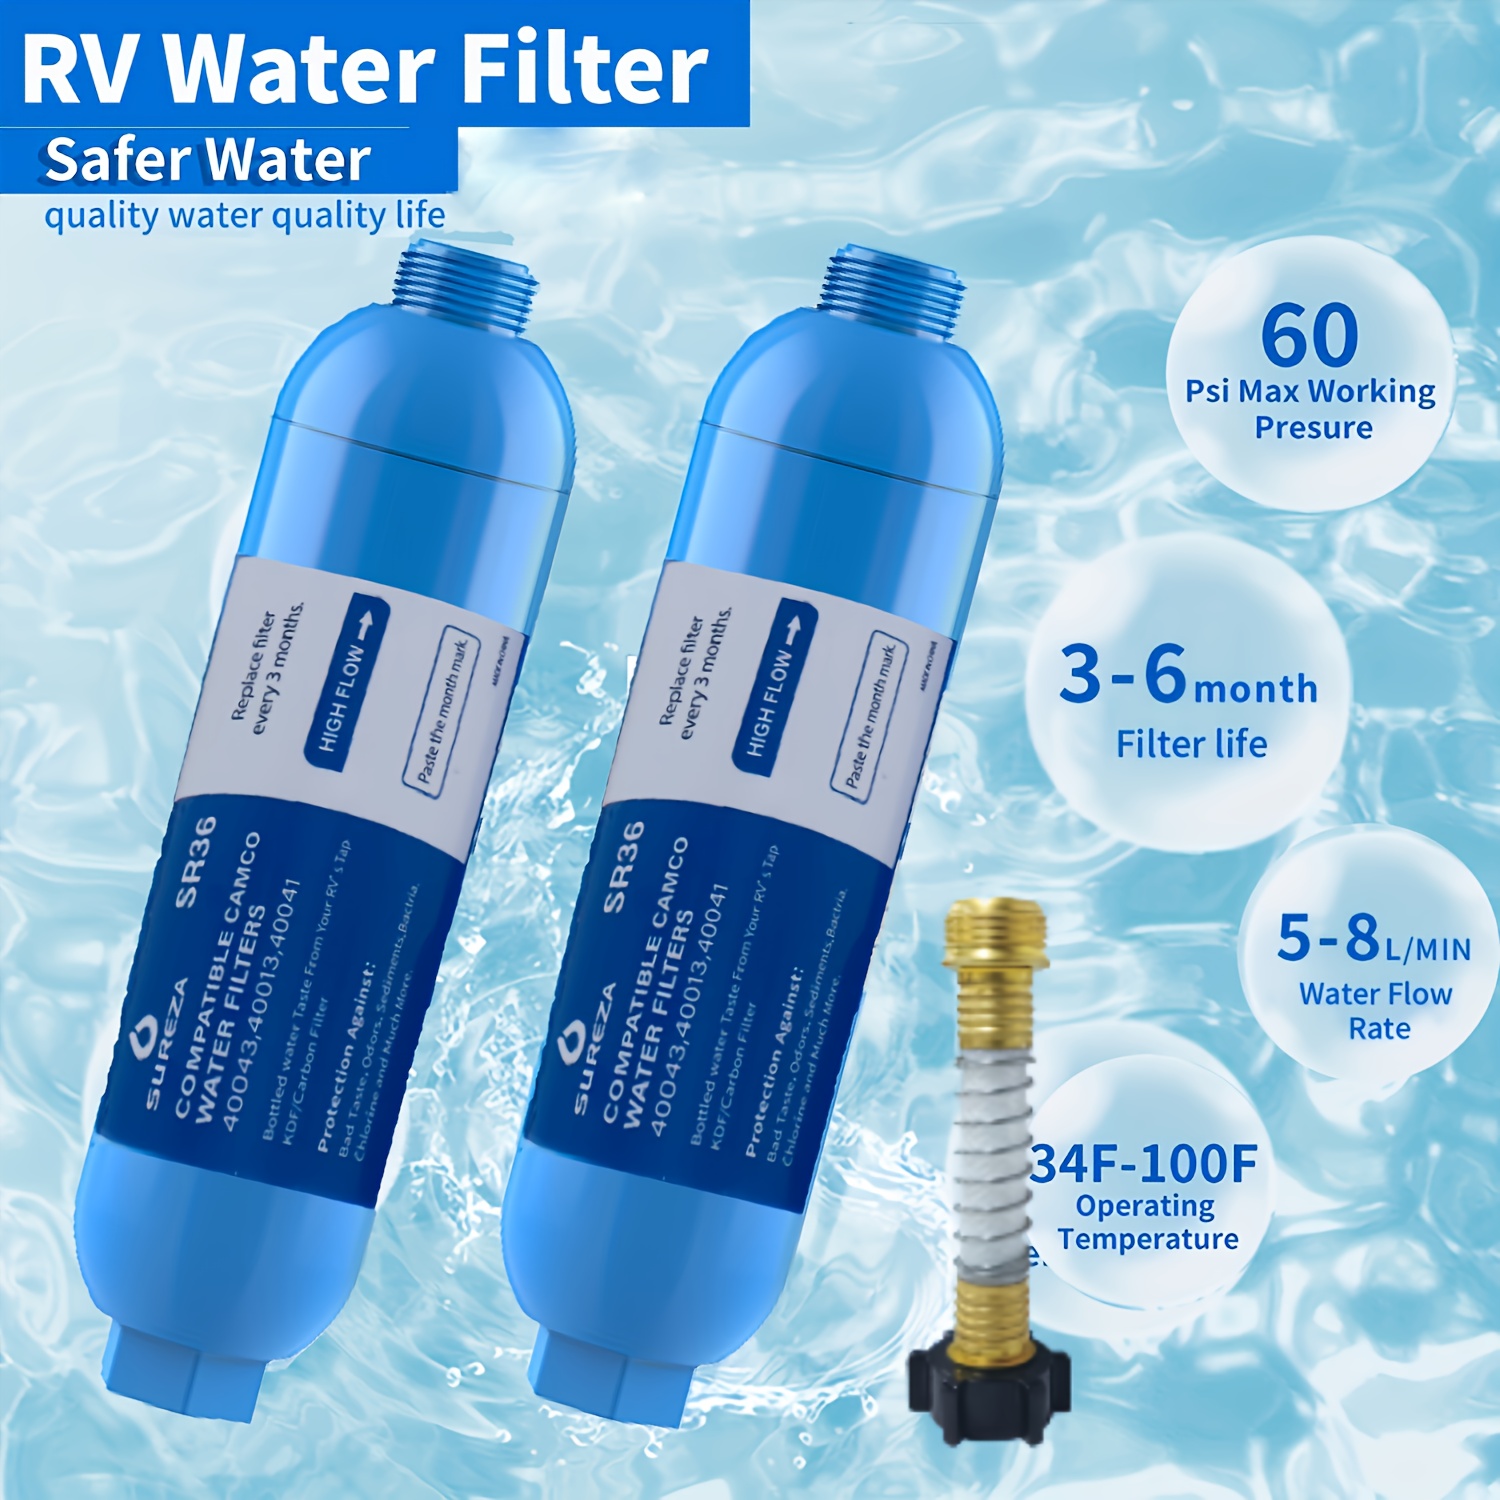 lifeegrn RV Water Filter with Hose Protector, Inline Water Filter, Reduces Bad Taste, Odors, Chlorine and Sediment in Drinking Water, Blue(2 Packs)